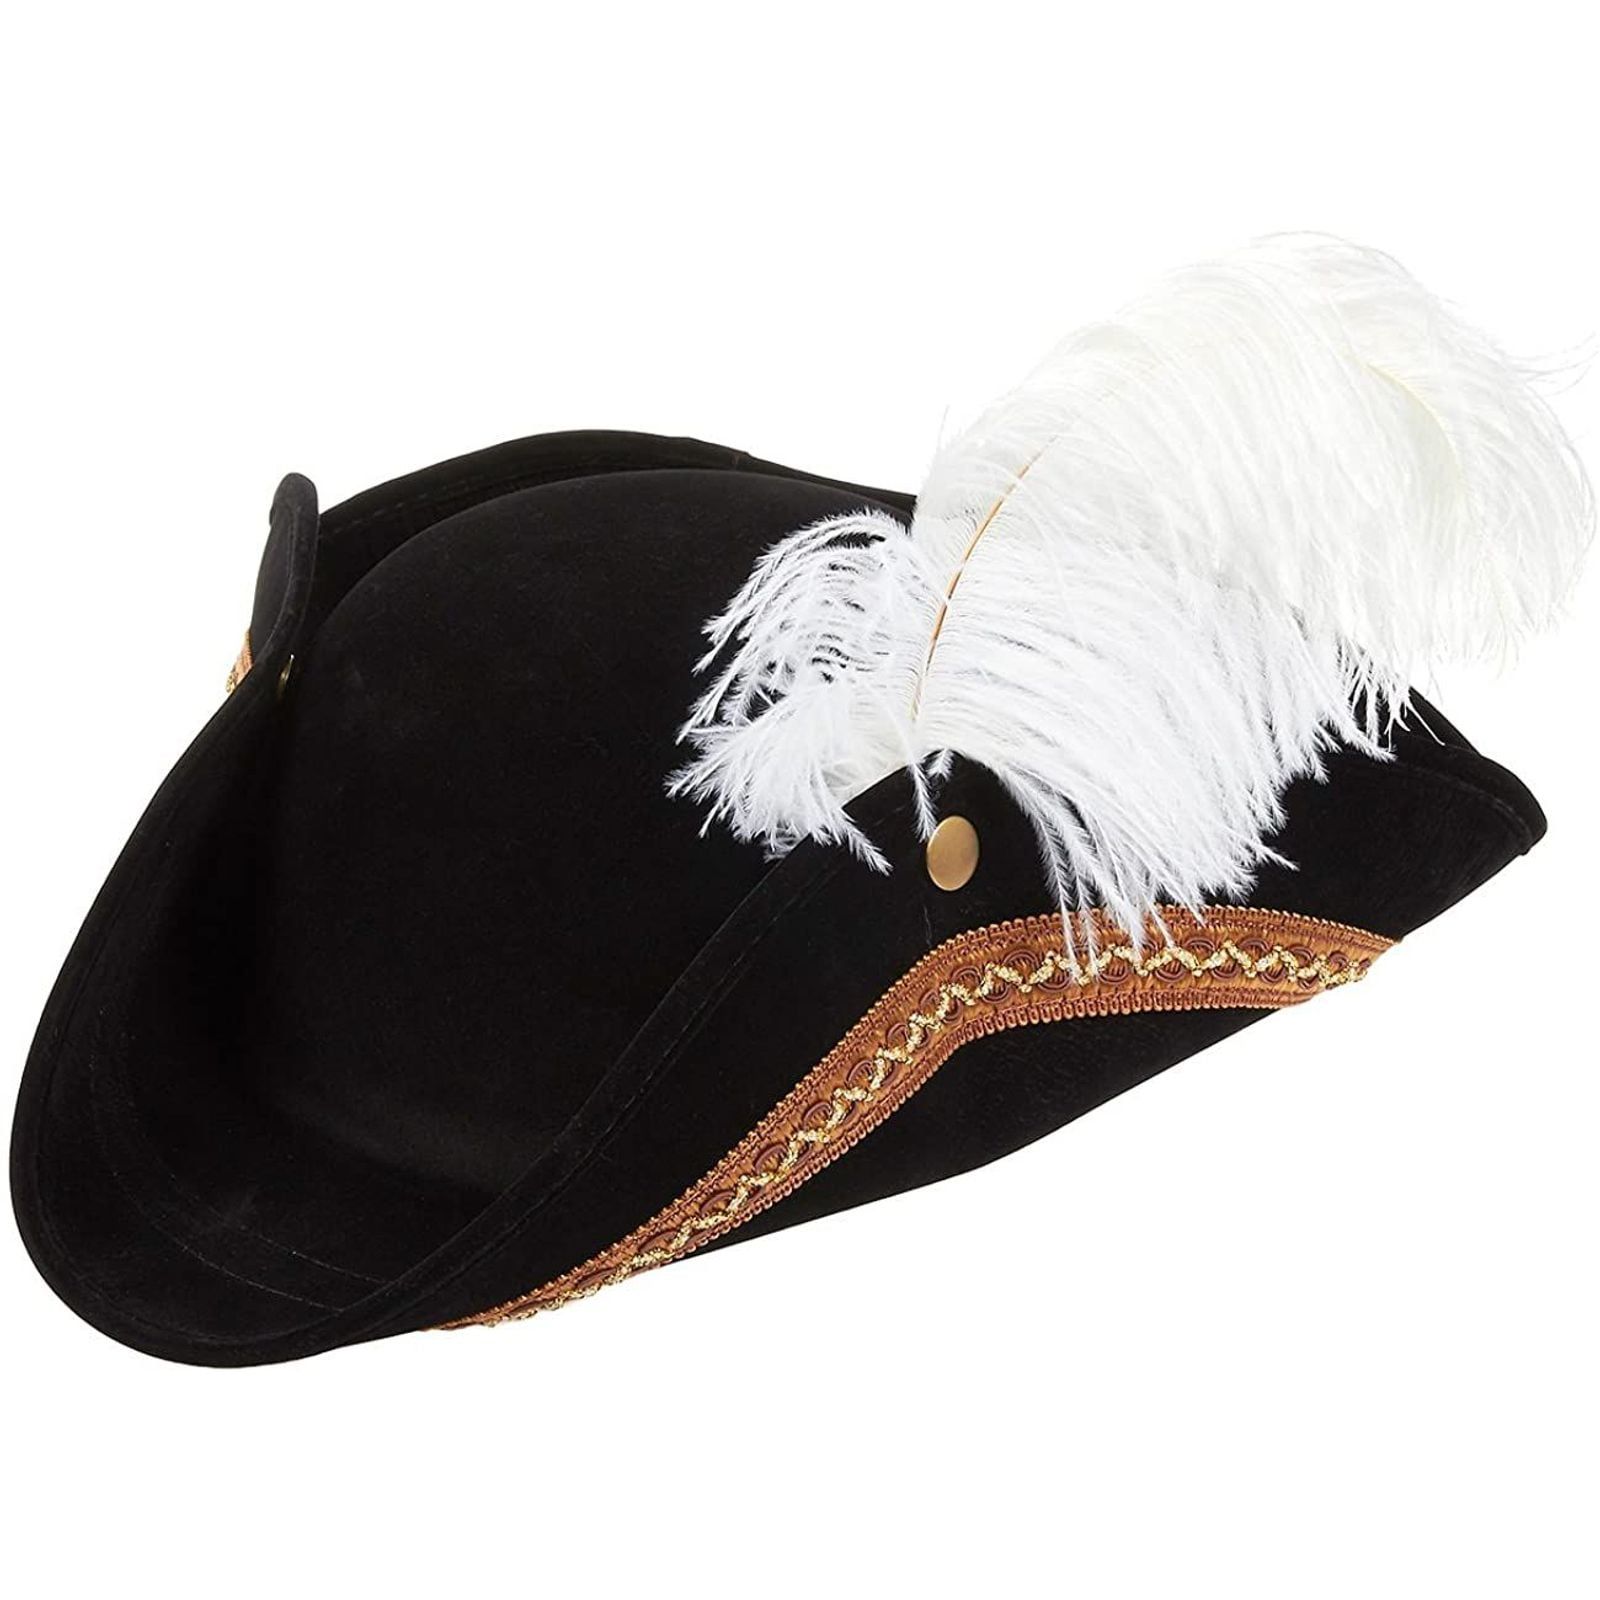 Deluxe Pirate Hat Adult Adult Unisex 